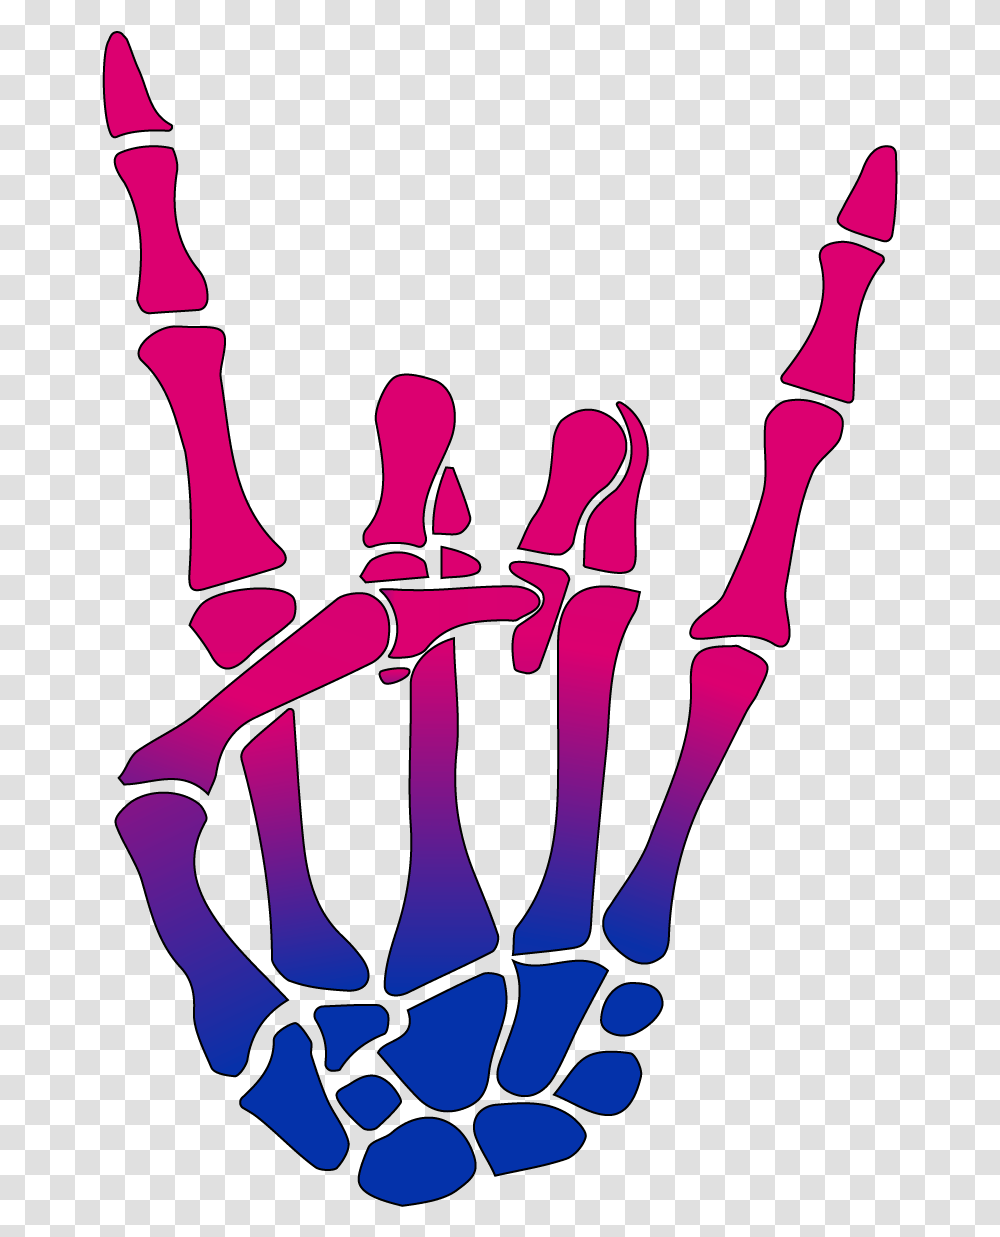 There Werent Any Bi Pride Symbols That Black And White Stencisl, Brush, Tool, Hand, Text Transparent Png